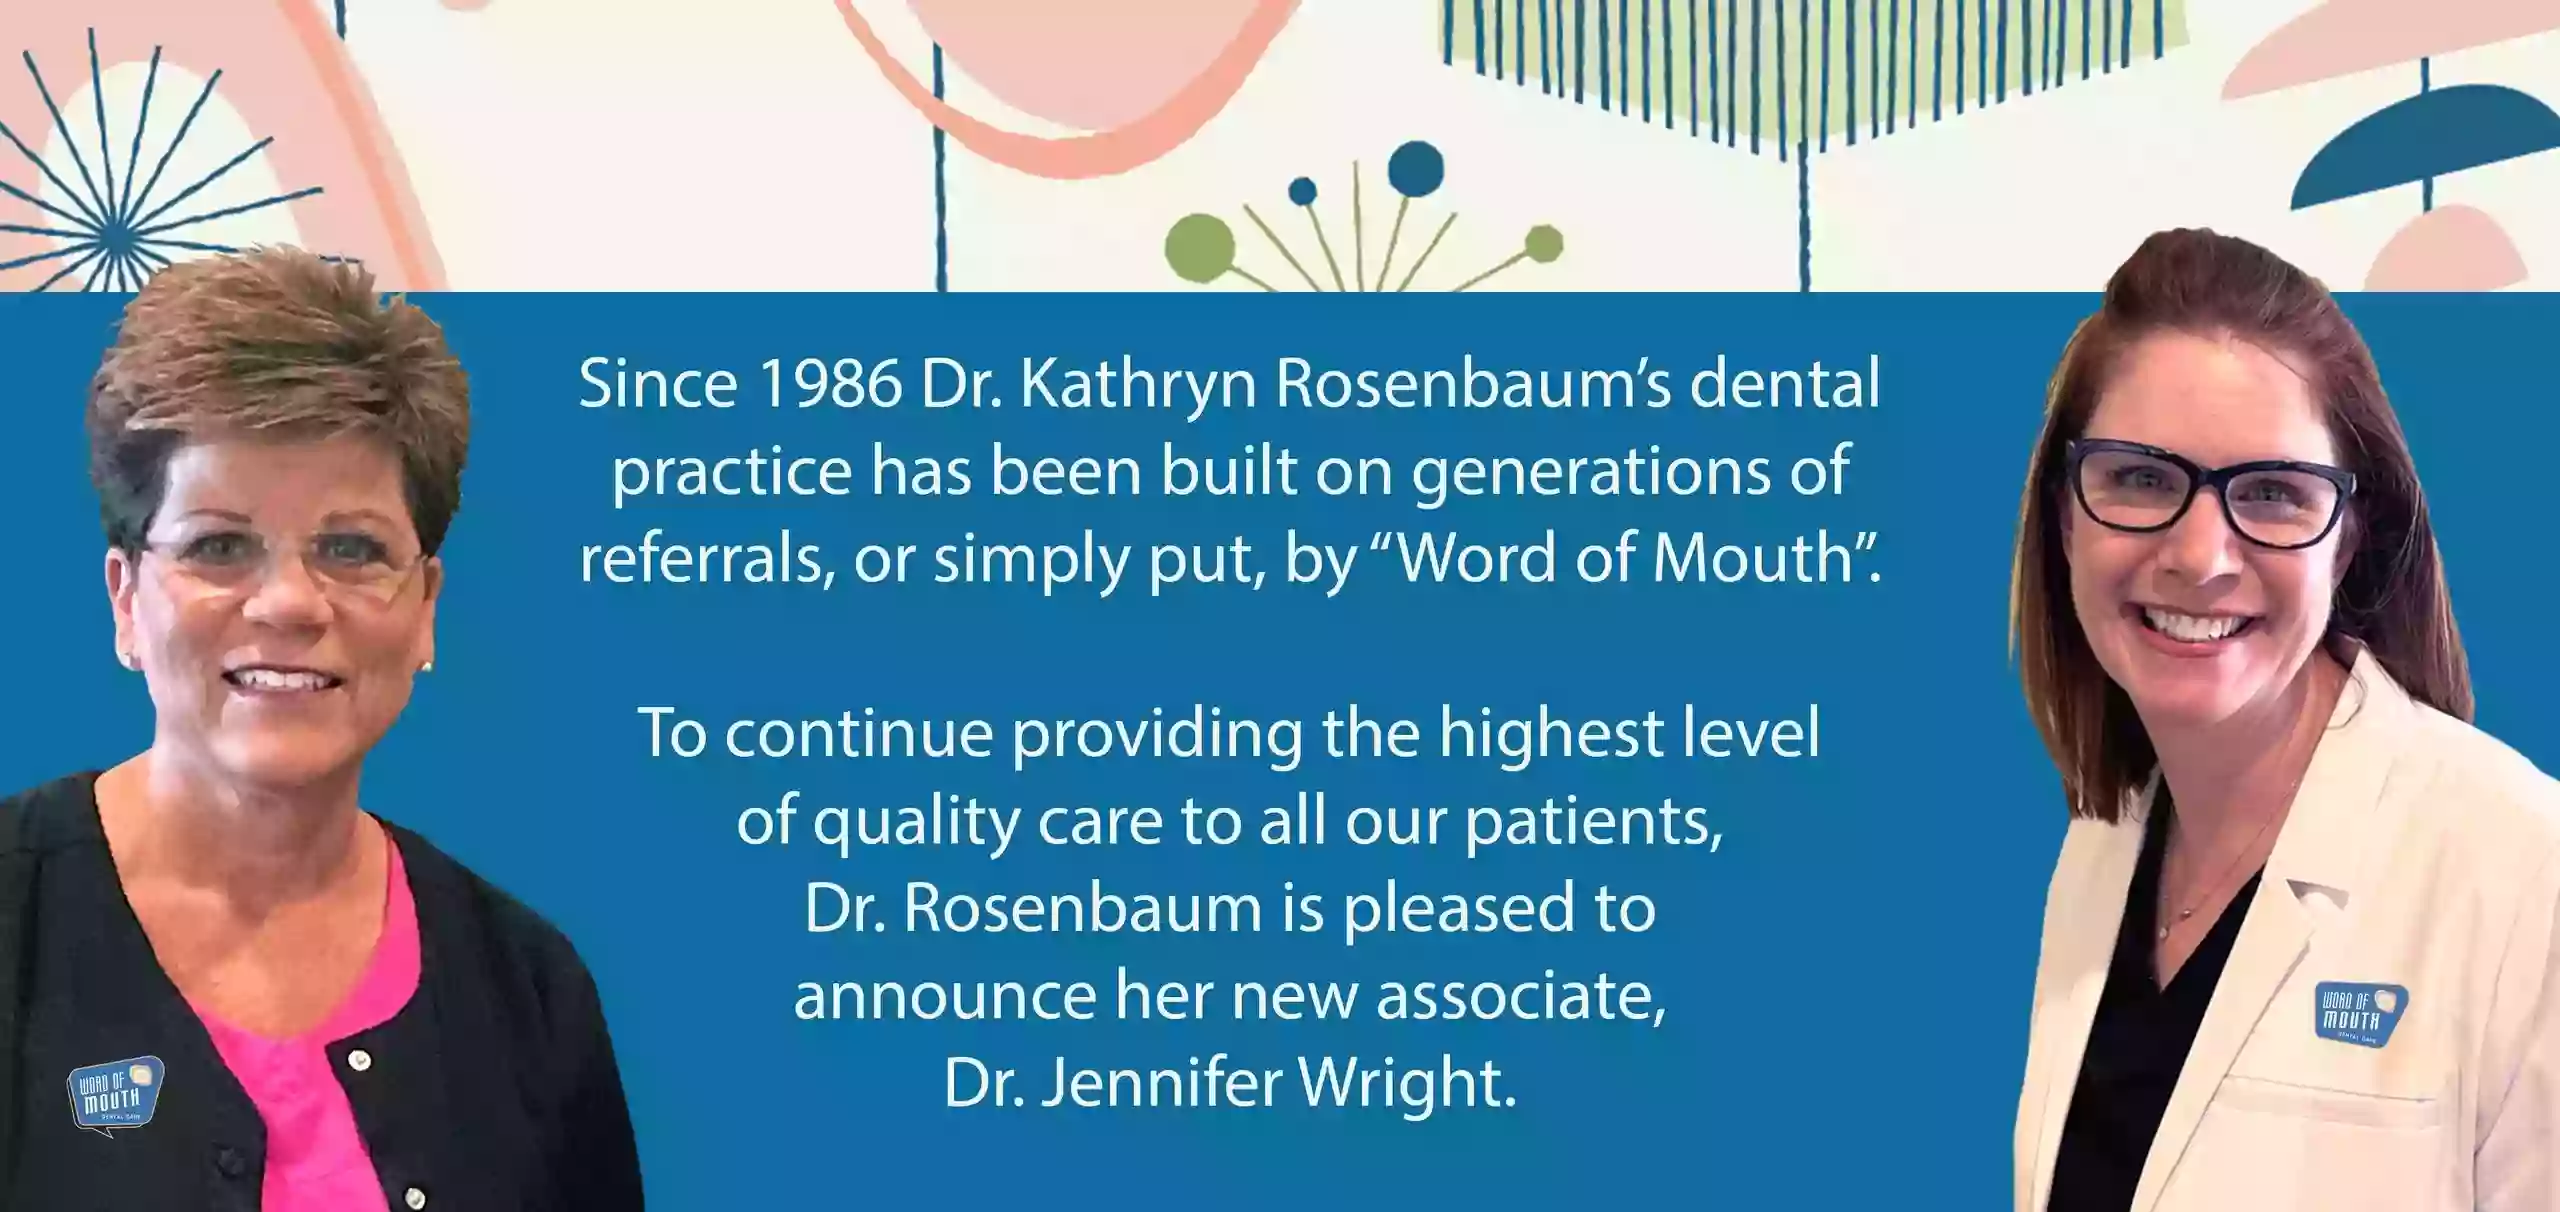 WORD OF MOUTH DENTAL CARE